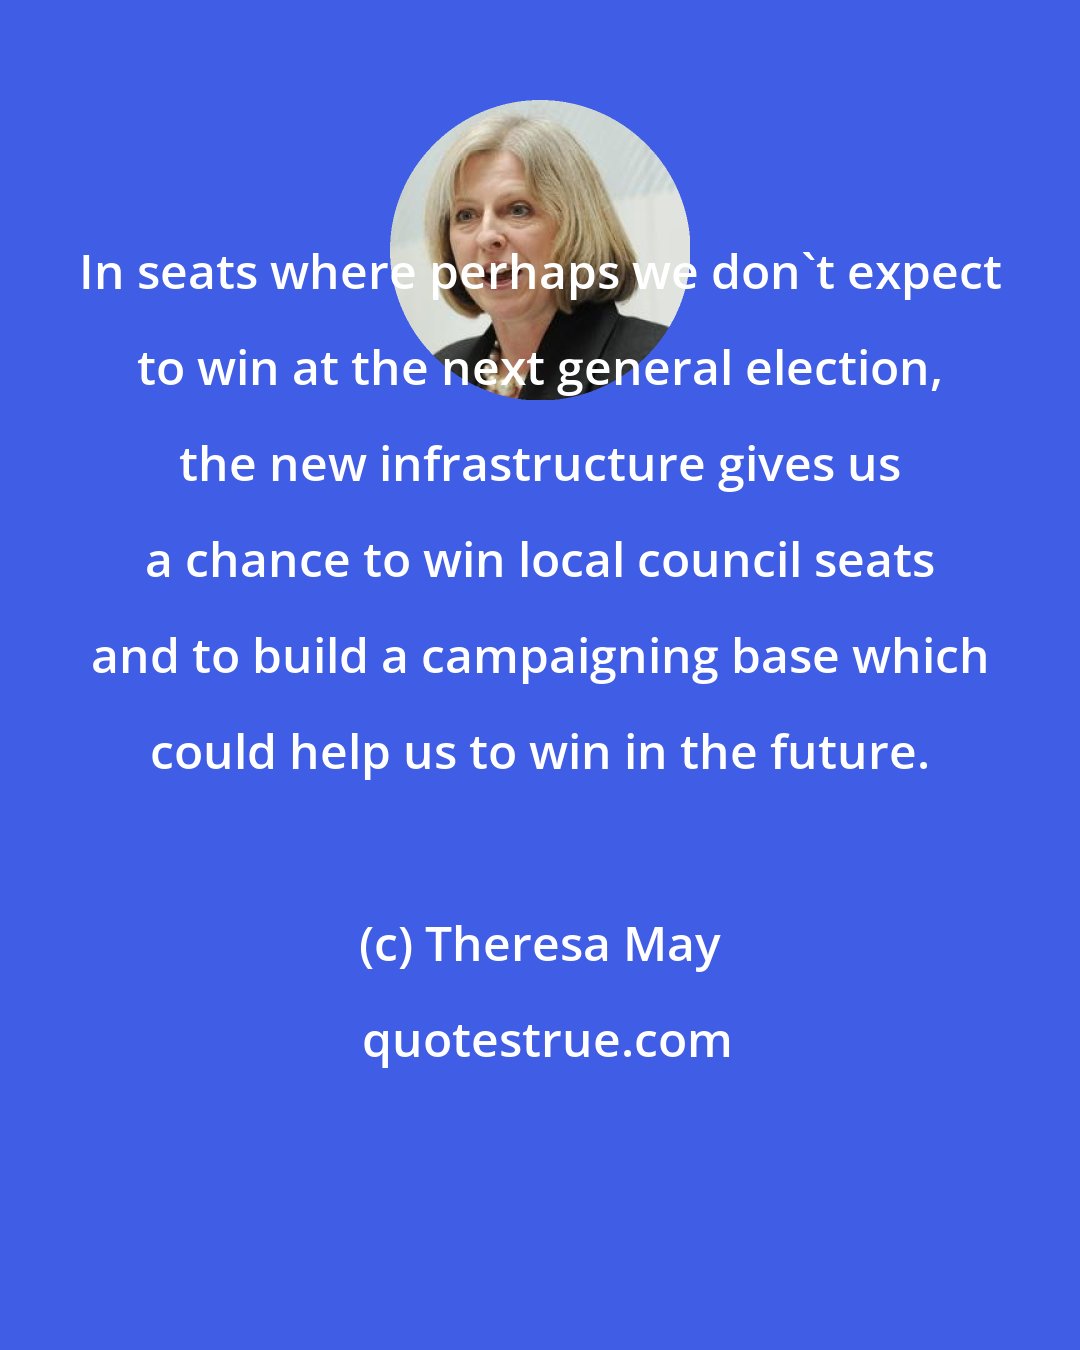 Theresa May: In seats where perhaps we don't expect to win at the next general election, the new infrastructure gives us a chance to win local council seats and to build a campaigning base which could help us to win in the future.